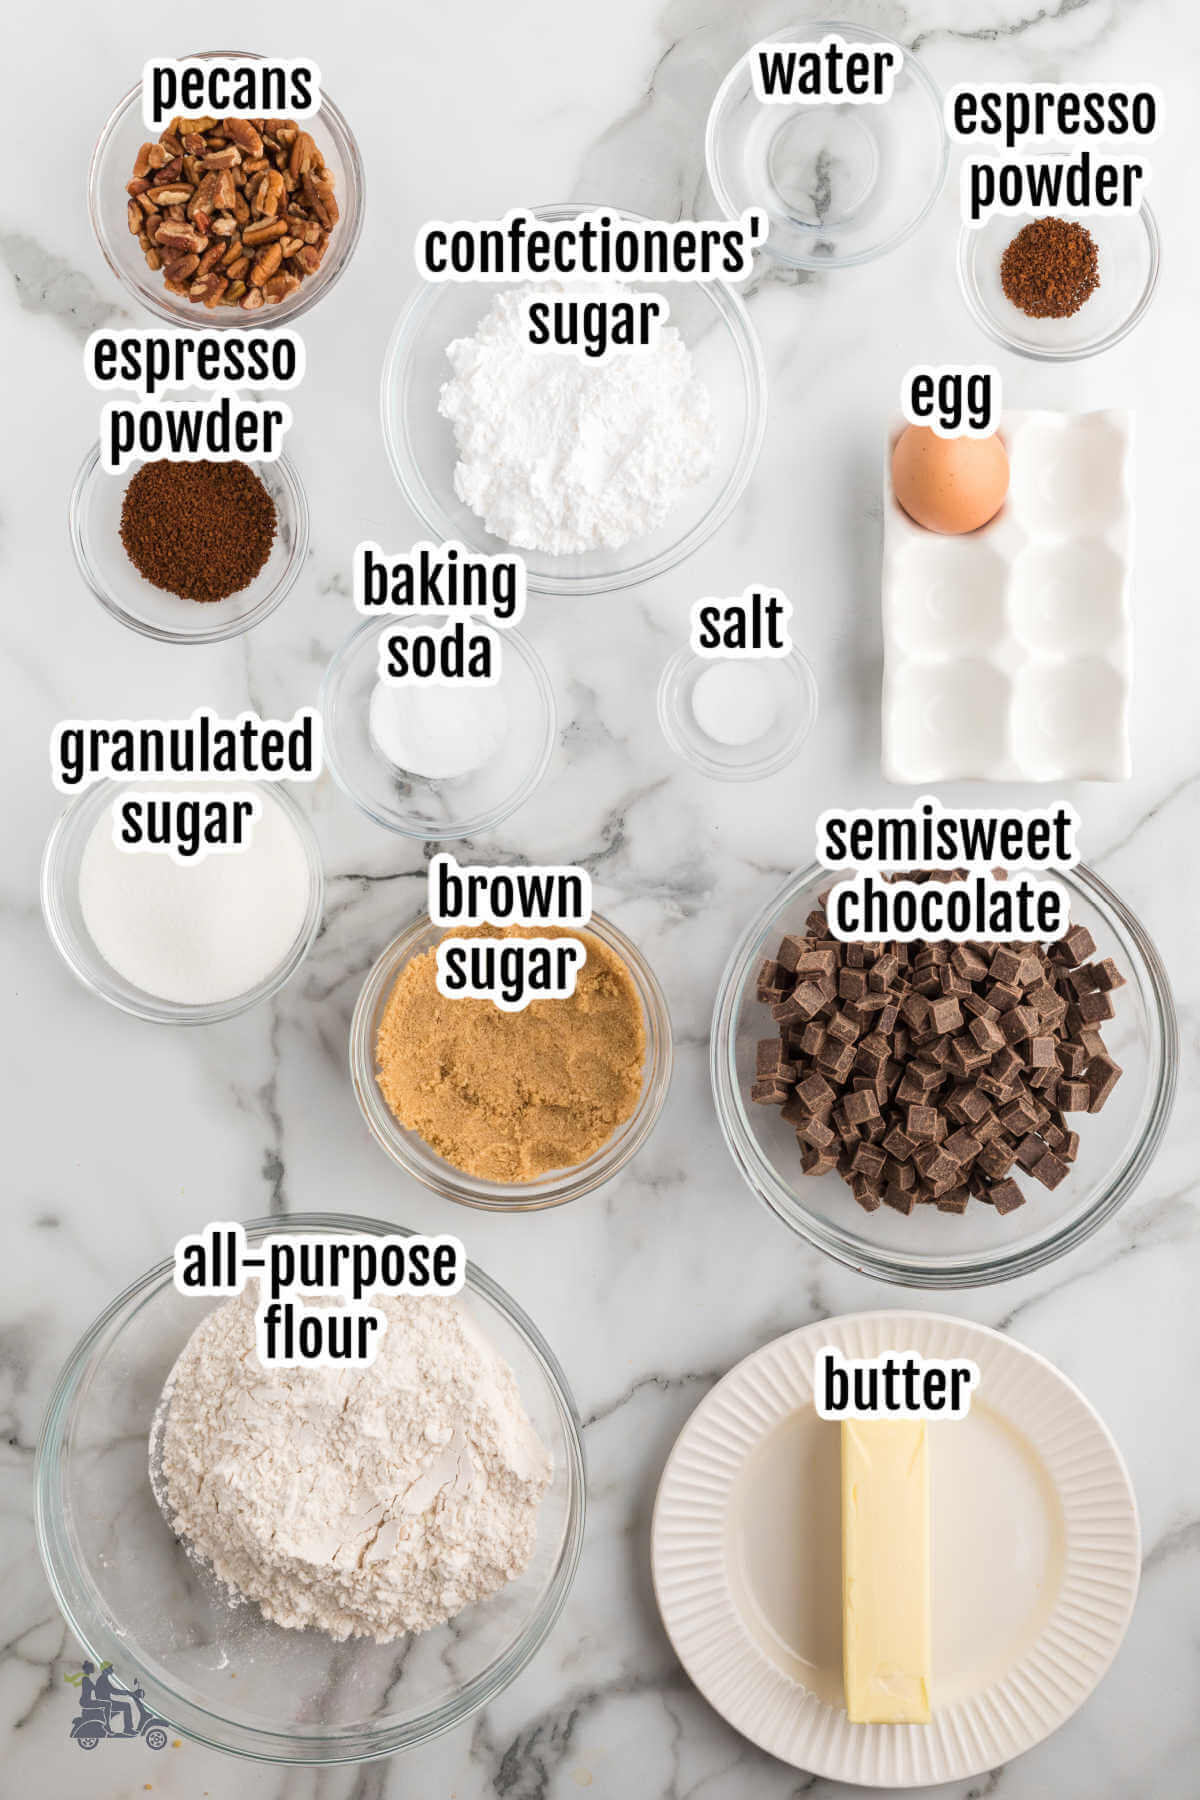 Image of the ingredients necessary for making the Espresso Coffee Cookies. 